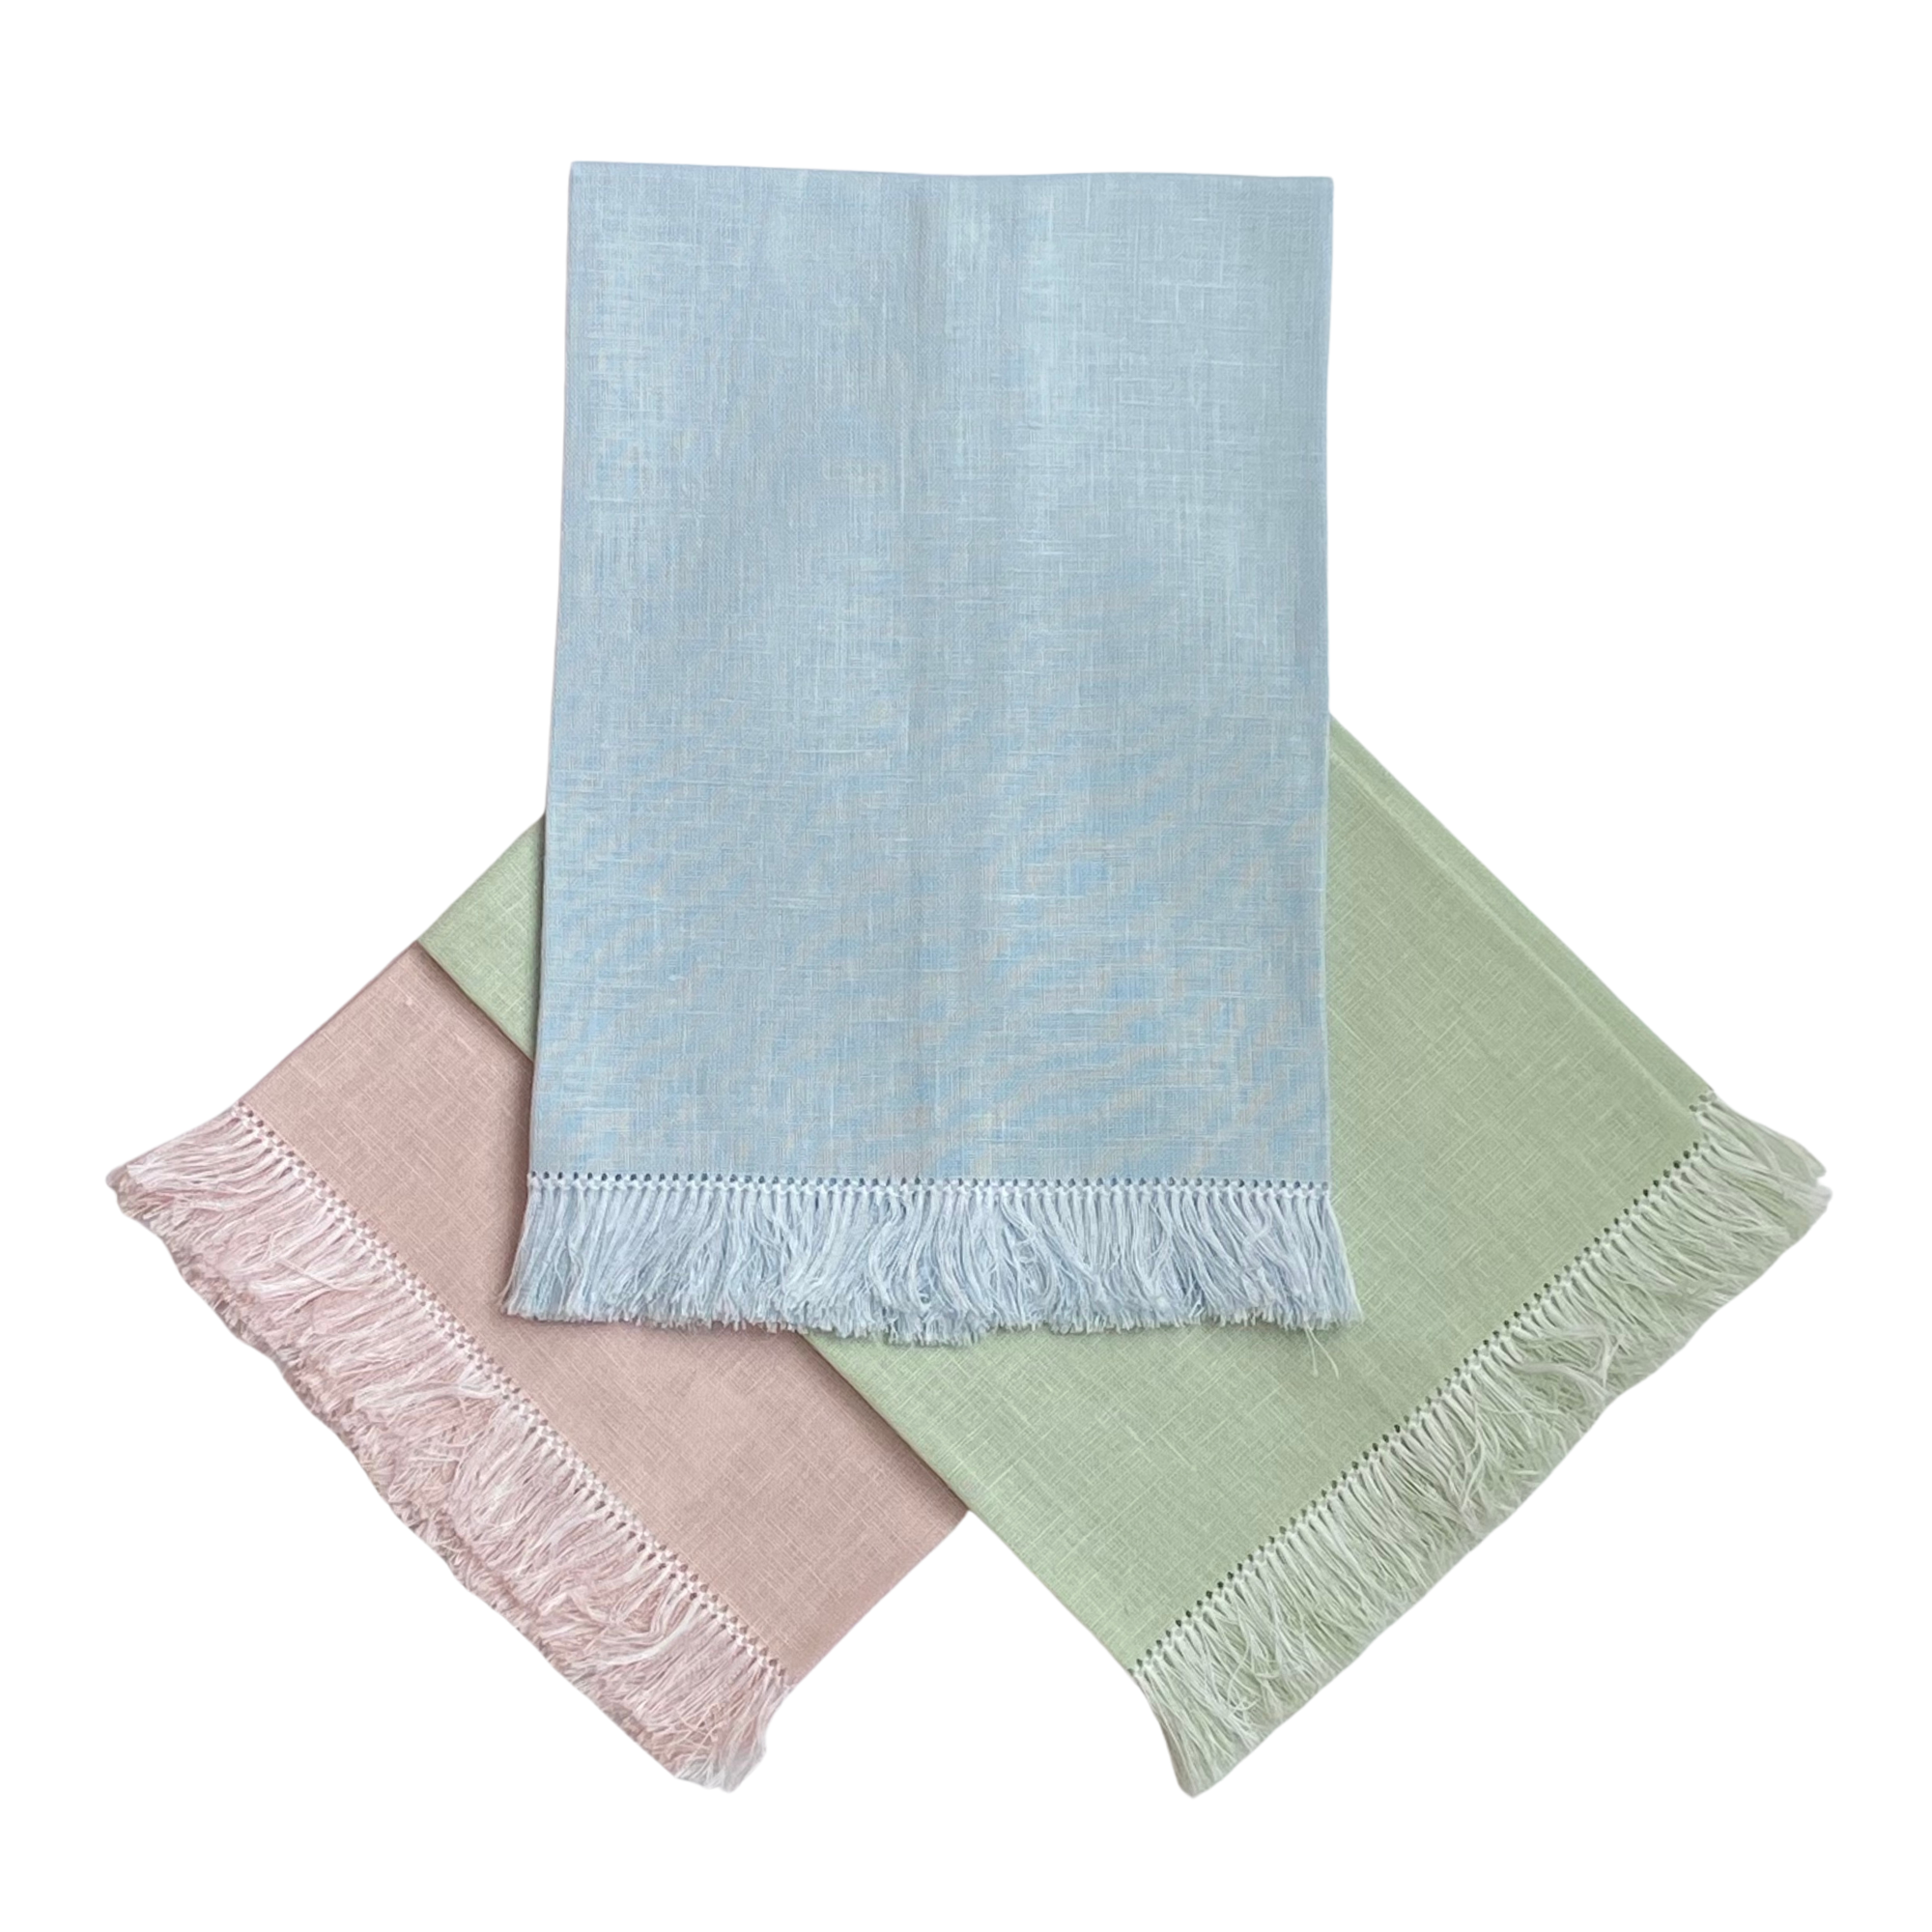 Brighten the guest bathroom with these pretty pastel fringed hand towels! Ready for embroidery or use them as they are, these 100% European linen guest towels measure approximately 14" x 20".